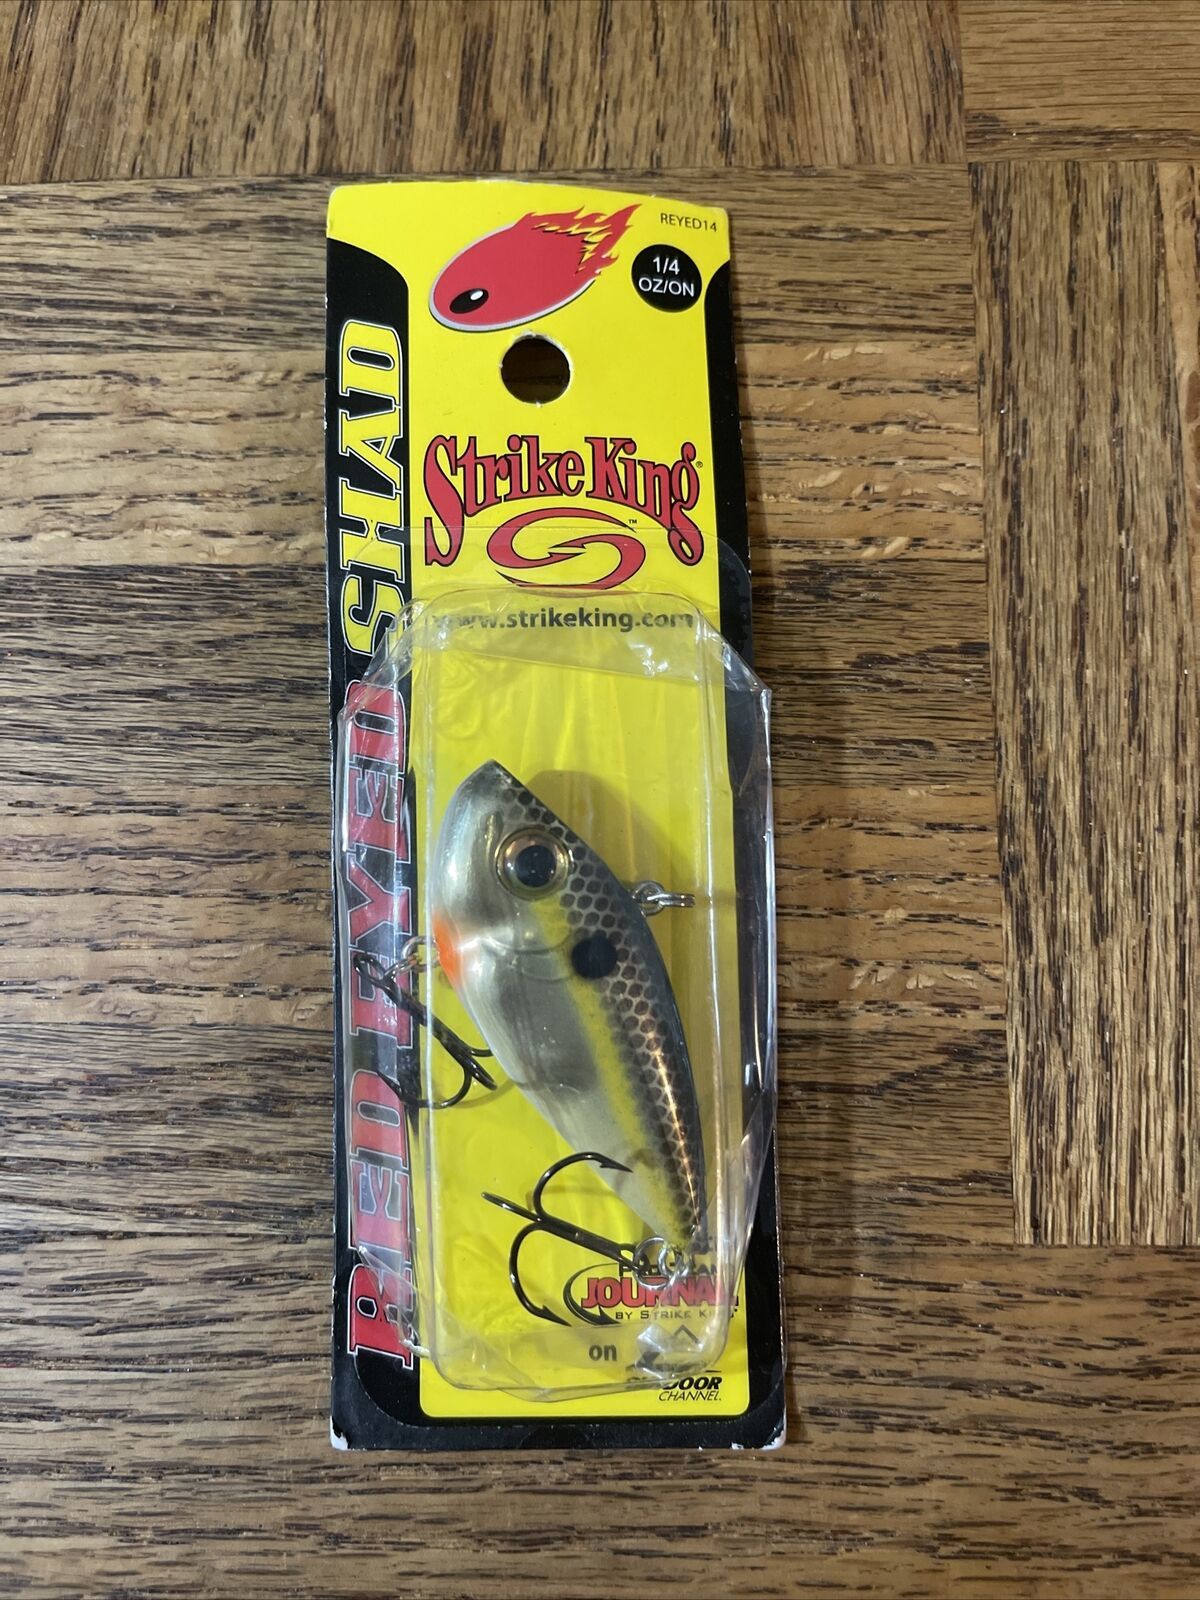 Primary image for Strike King Red Eye Shad Hook 1/4-BRAND NEW-SHIPS SAME BUSINESS DAY